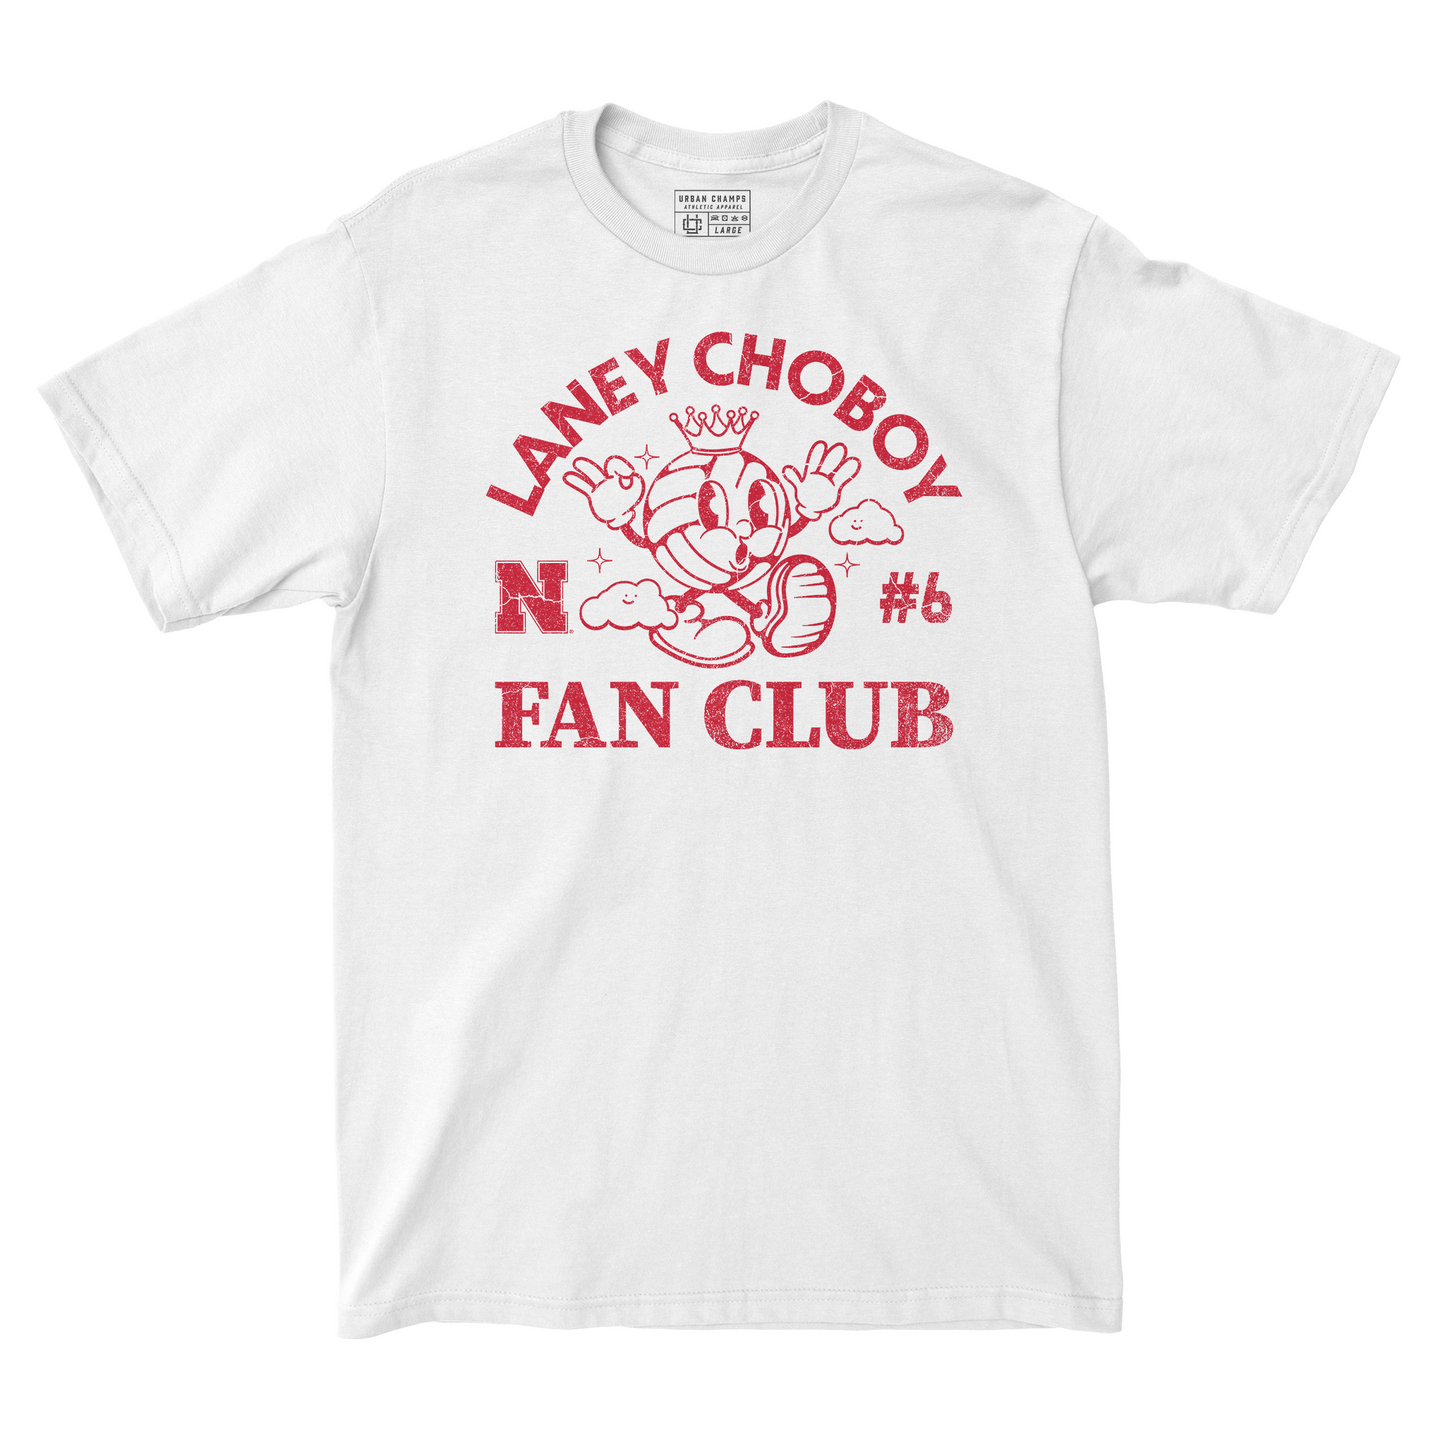 EXCLUSIVE: Nebraska Women's Volleyball - Laney Choboy - Fan Club Collection Tees